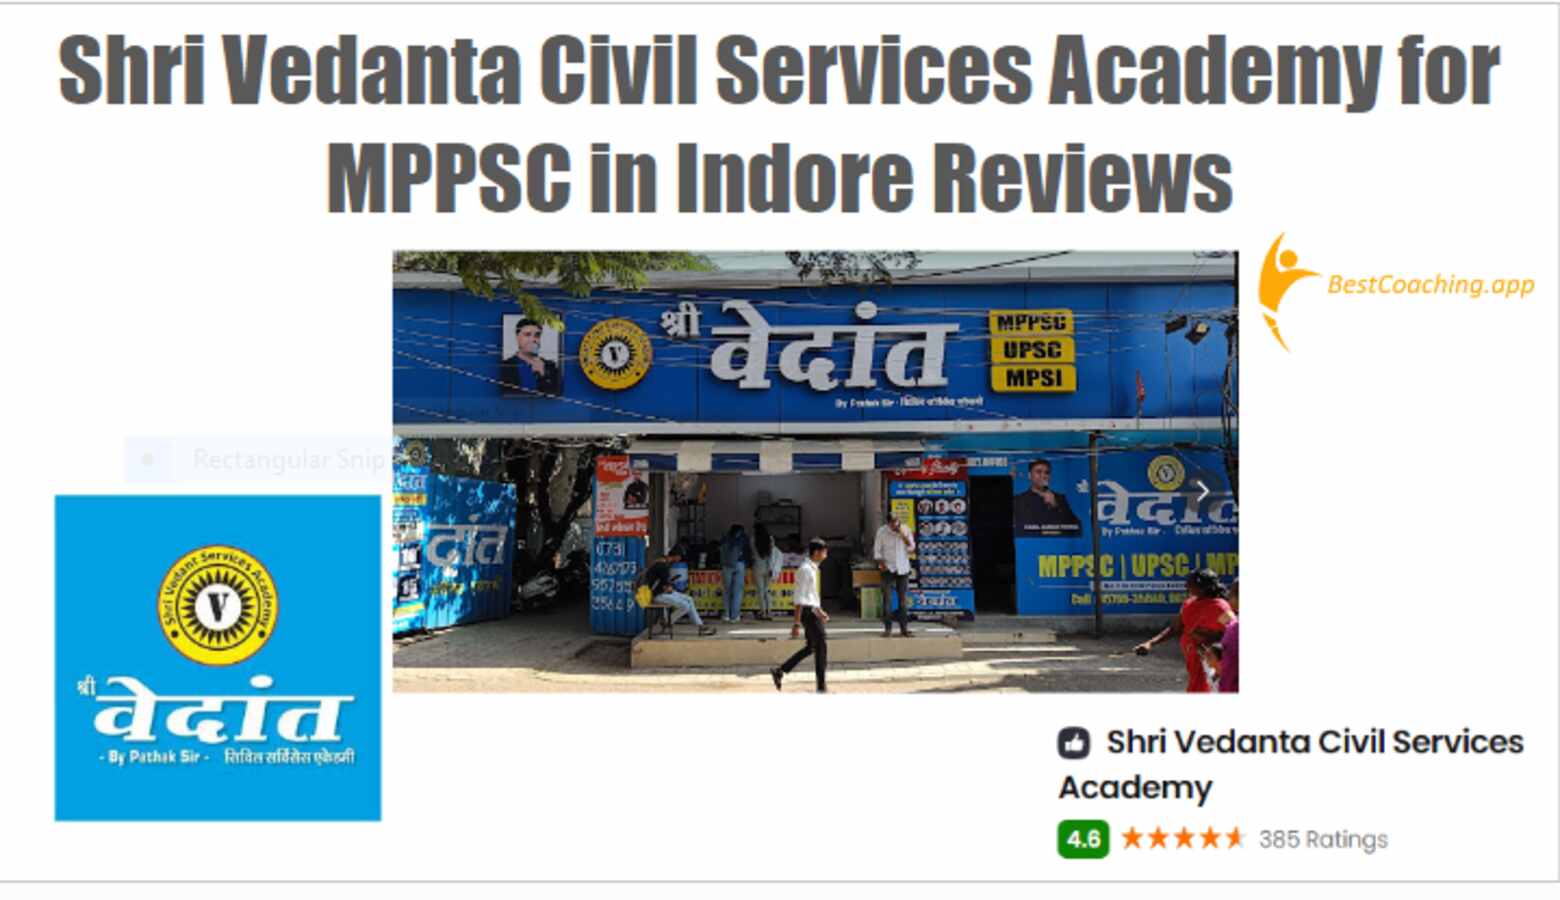 Shri Vedanta Civil Services Academy for MPPSC in Indore Reviews